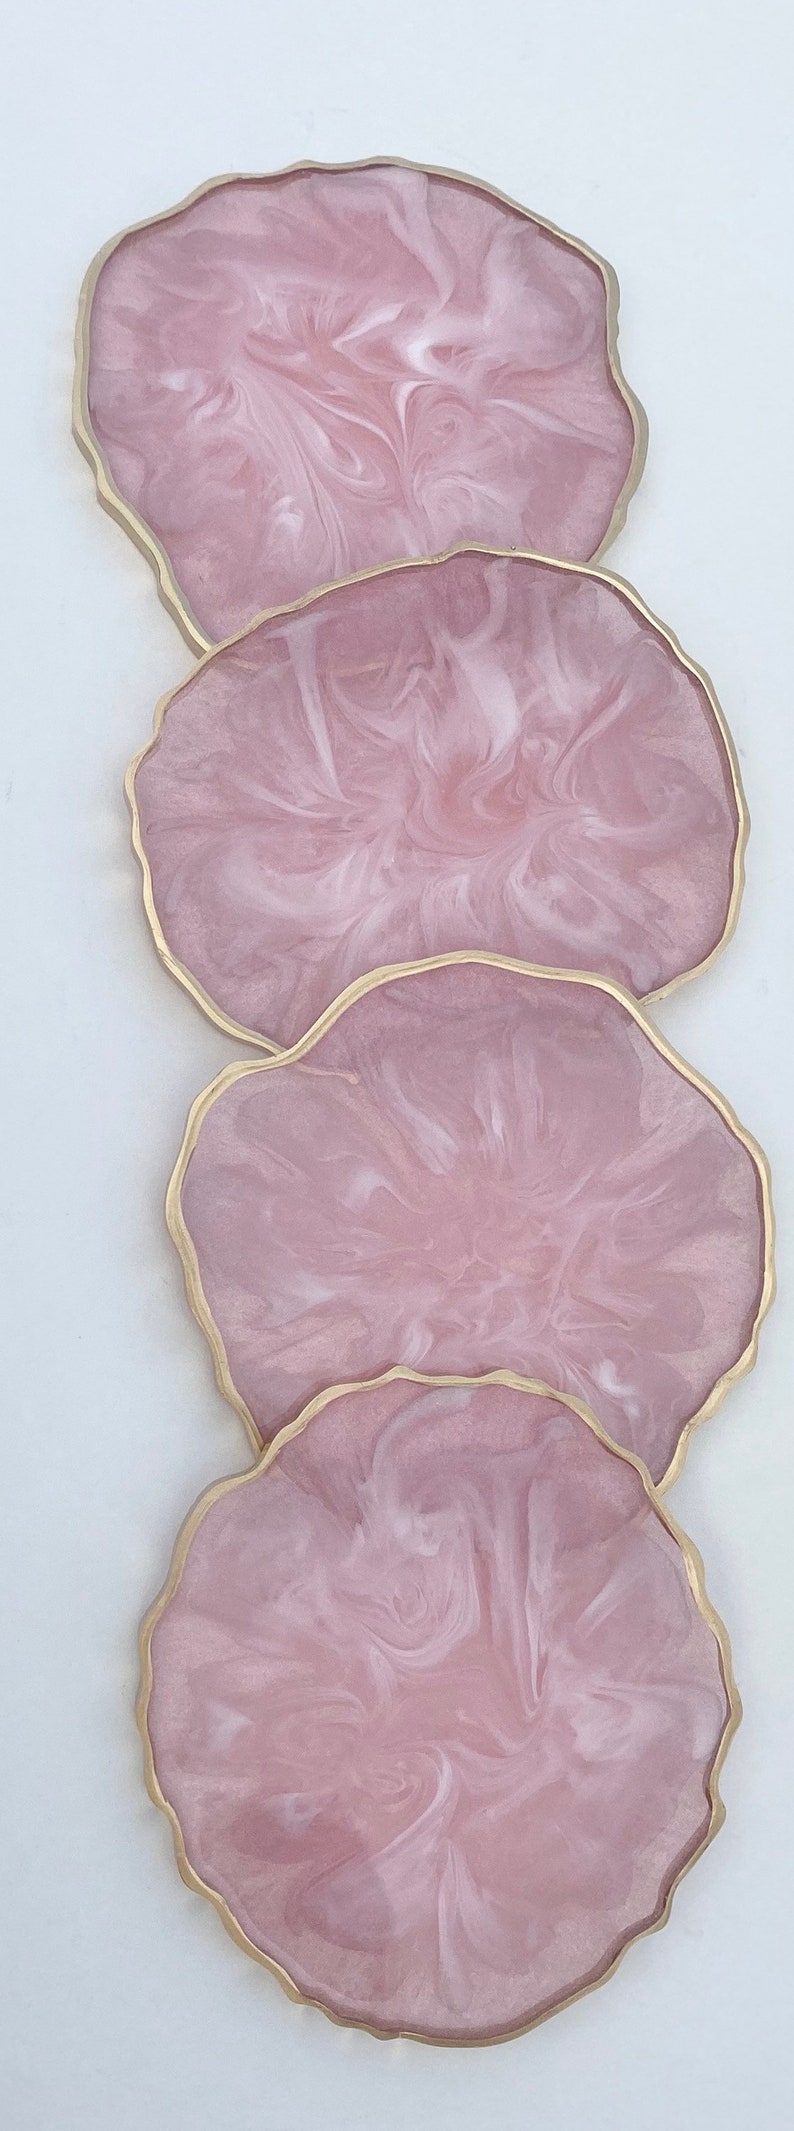 Resin coaster set pink and White marble look Geode Agate Epoxy Coasters, great housewarming gifts. Easter spring modern home decor. image 9